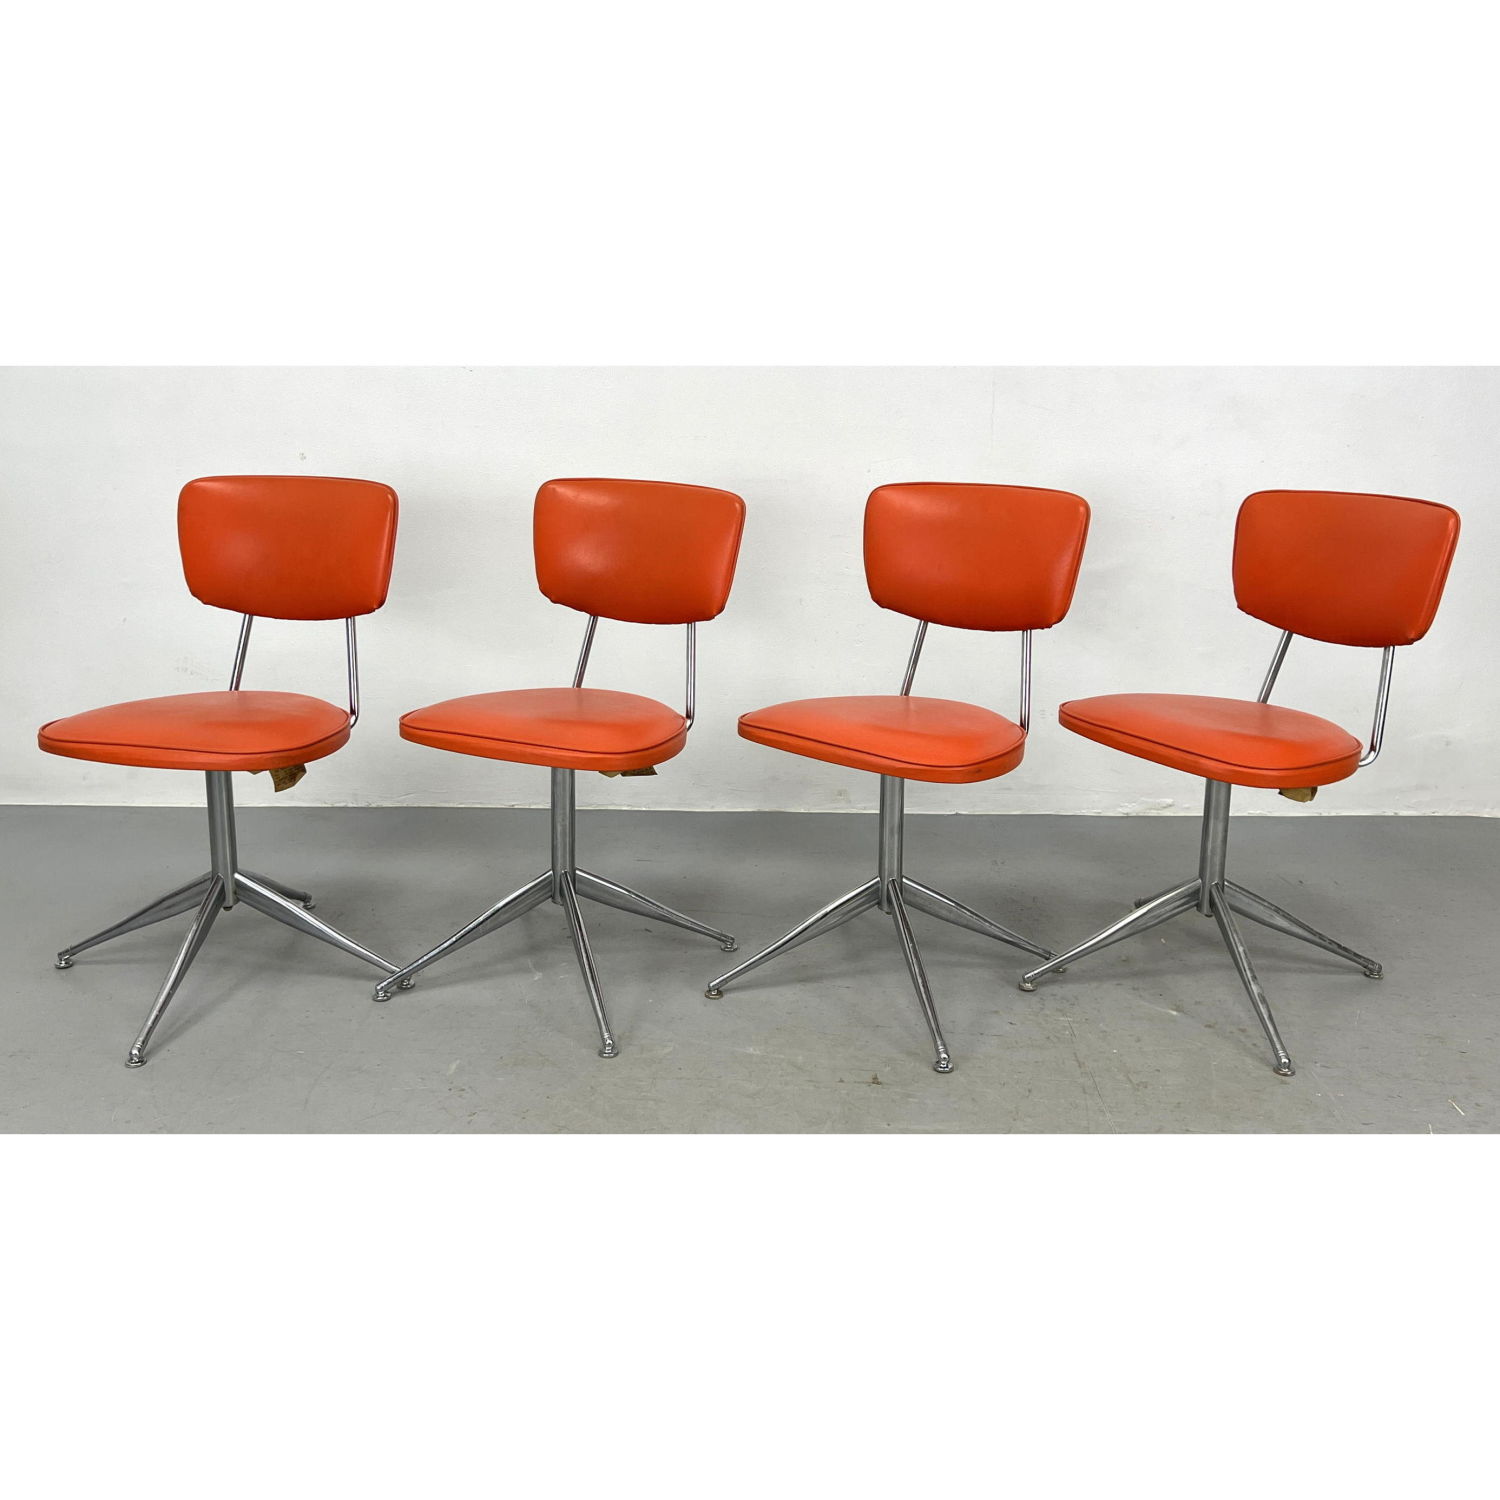 Viko furniture dining chairs. 50s